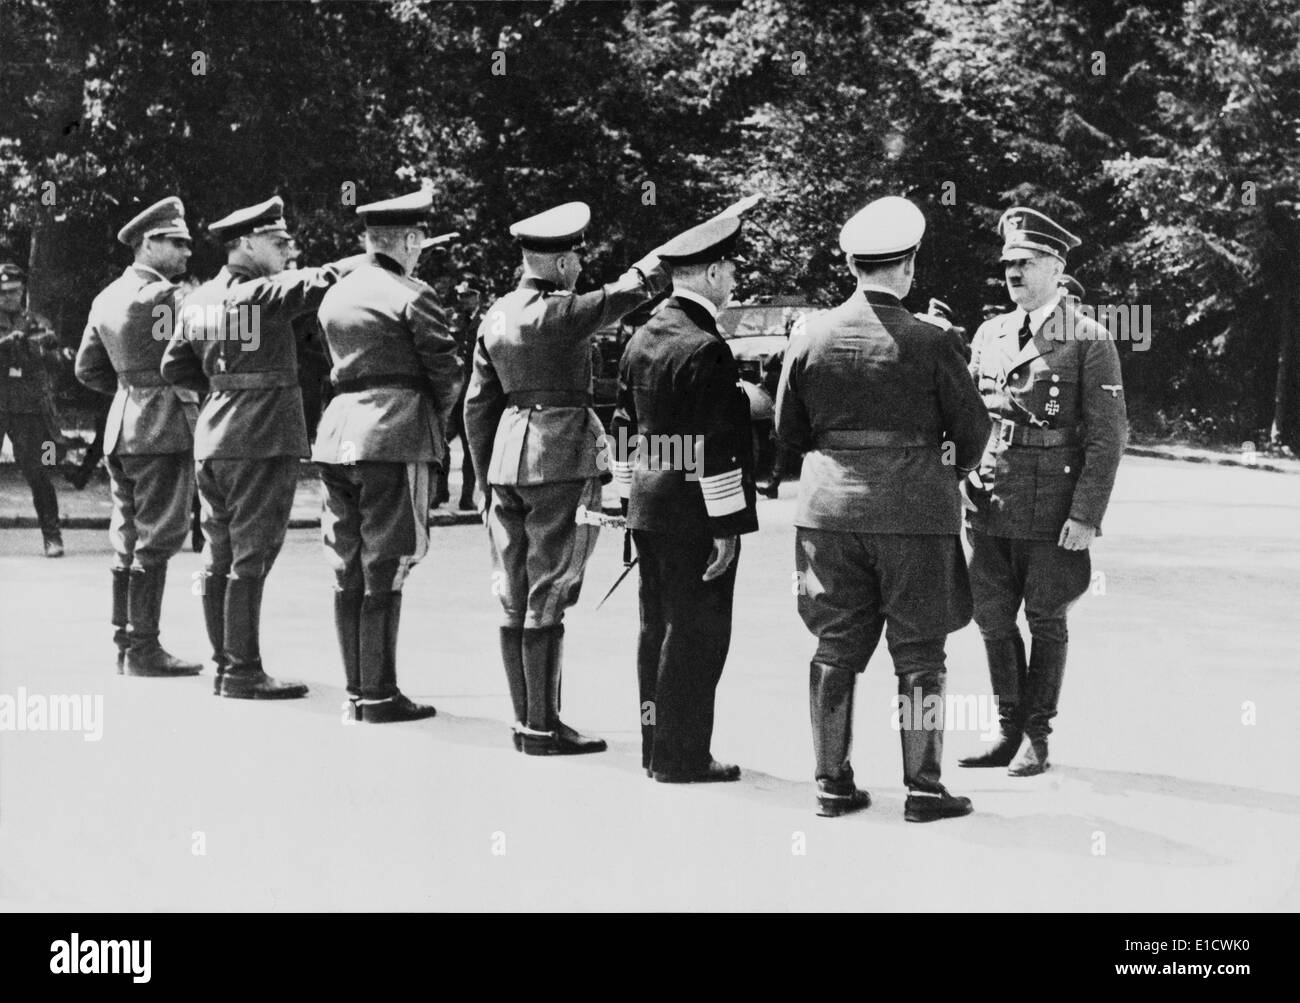 Adolf Hitler arrives at the ceasefire negotiations at Compiegne, France. Those saluting L-R: Rudolf Hess, unidentified, Walther Stock Photo